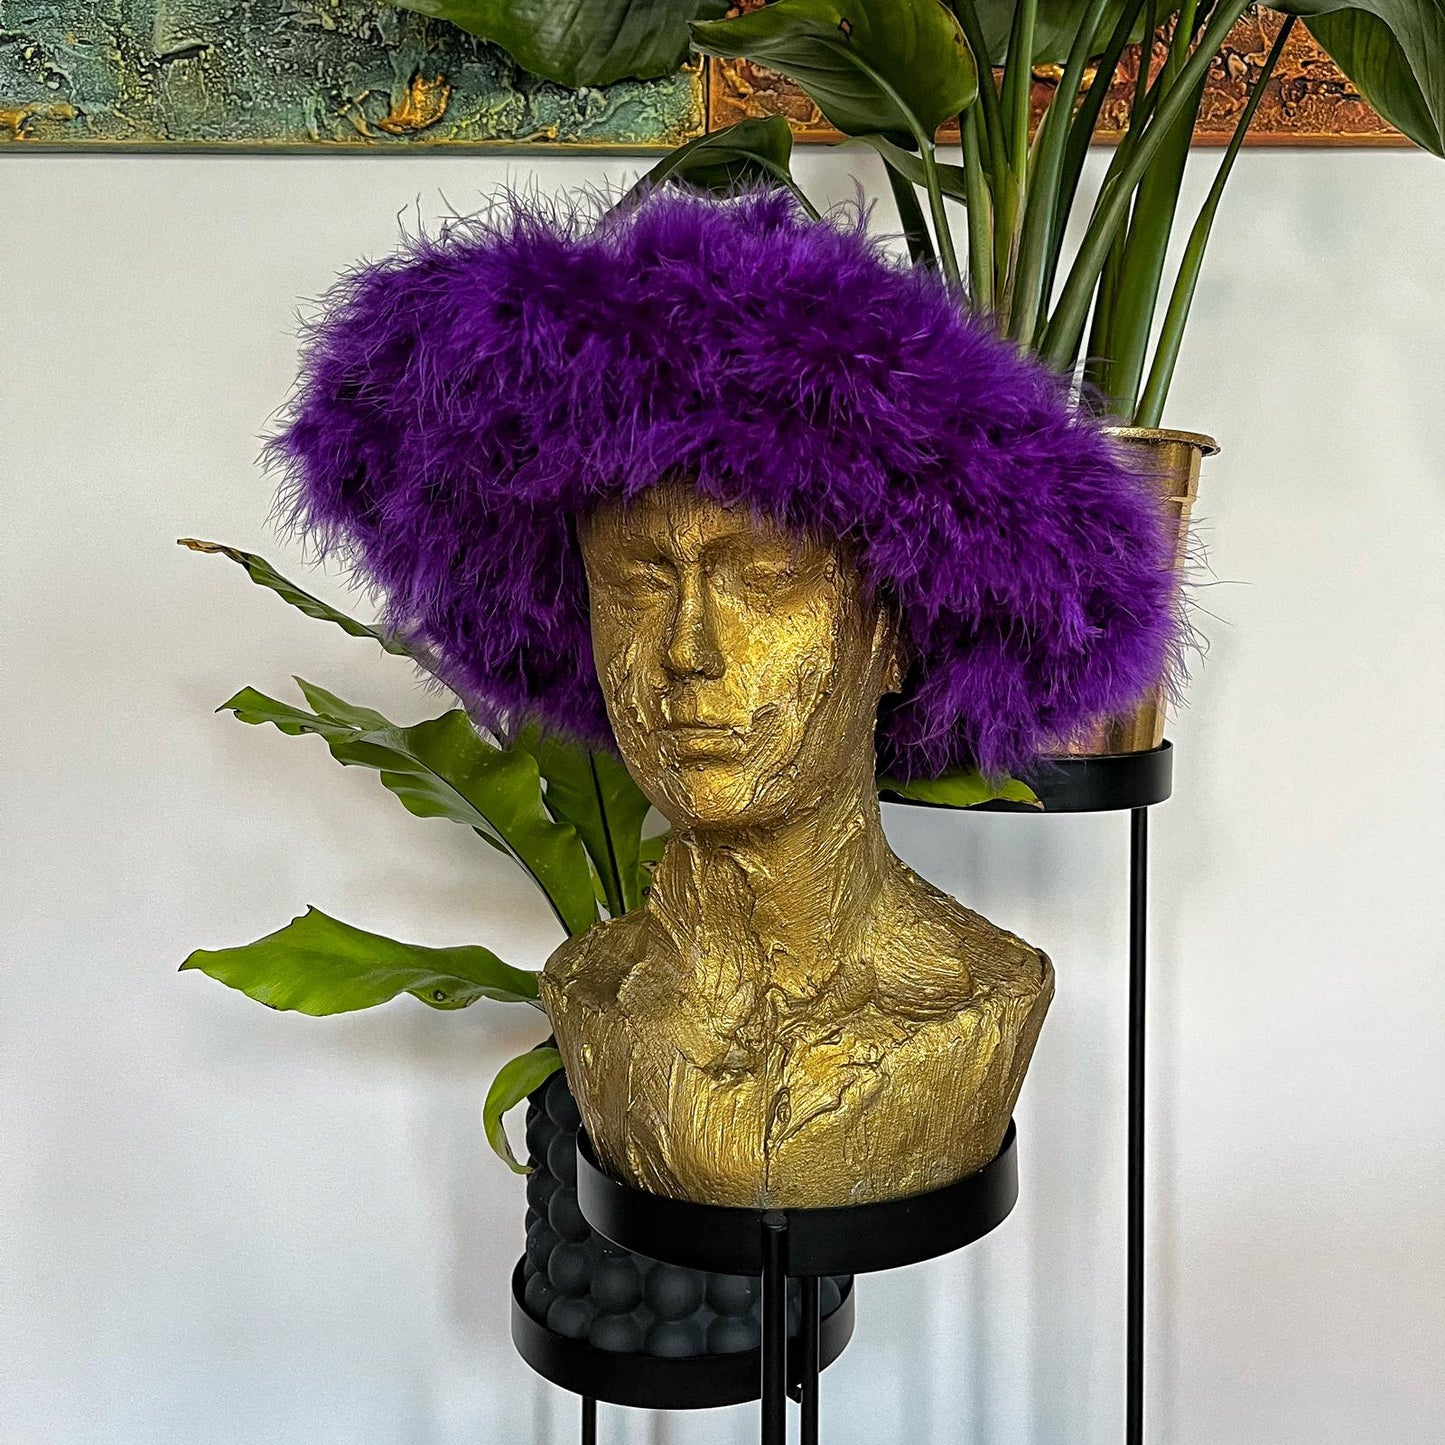 The 'Reign' Purple Fluffy Marabou Feather Hat